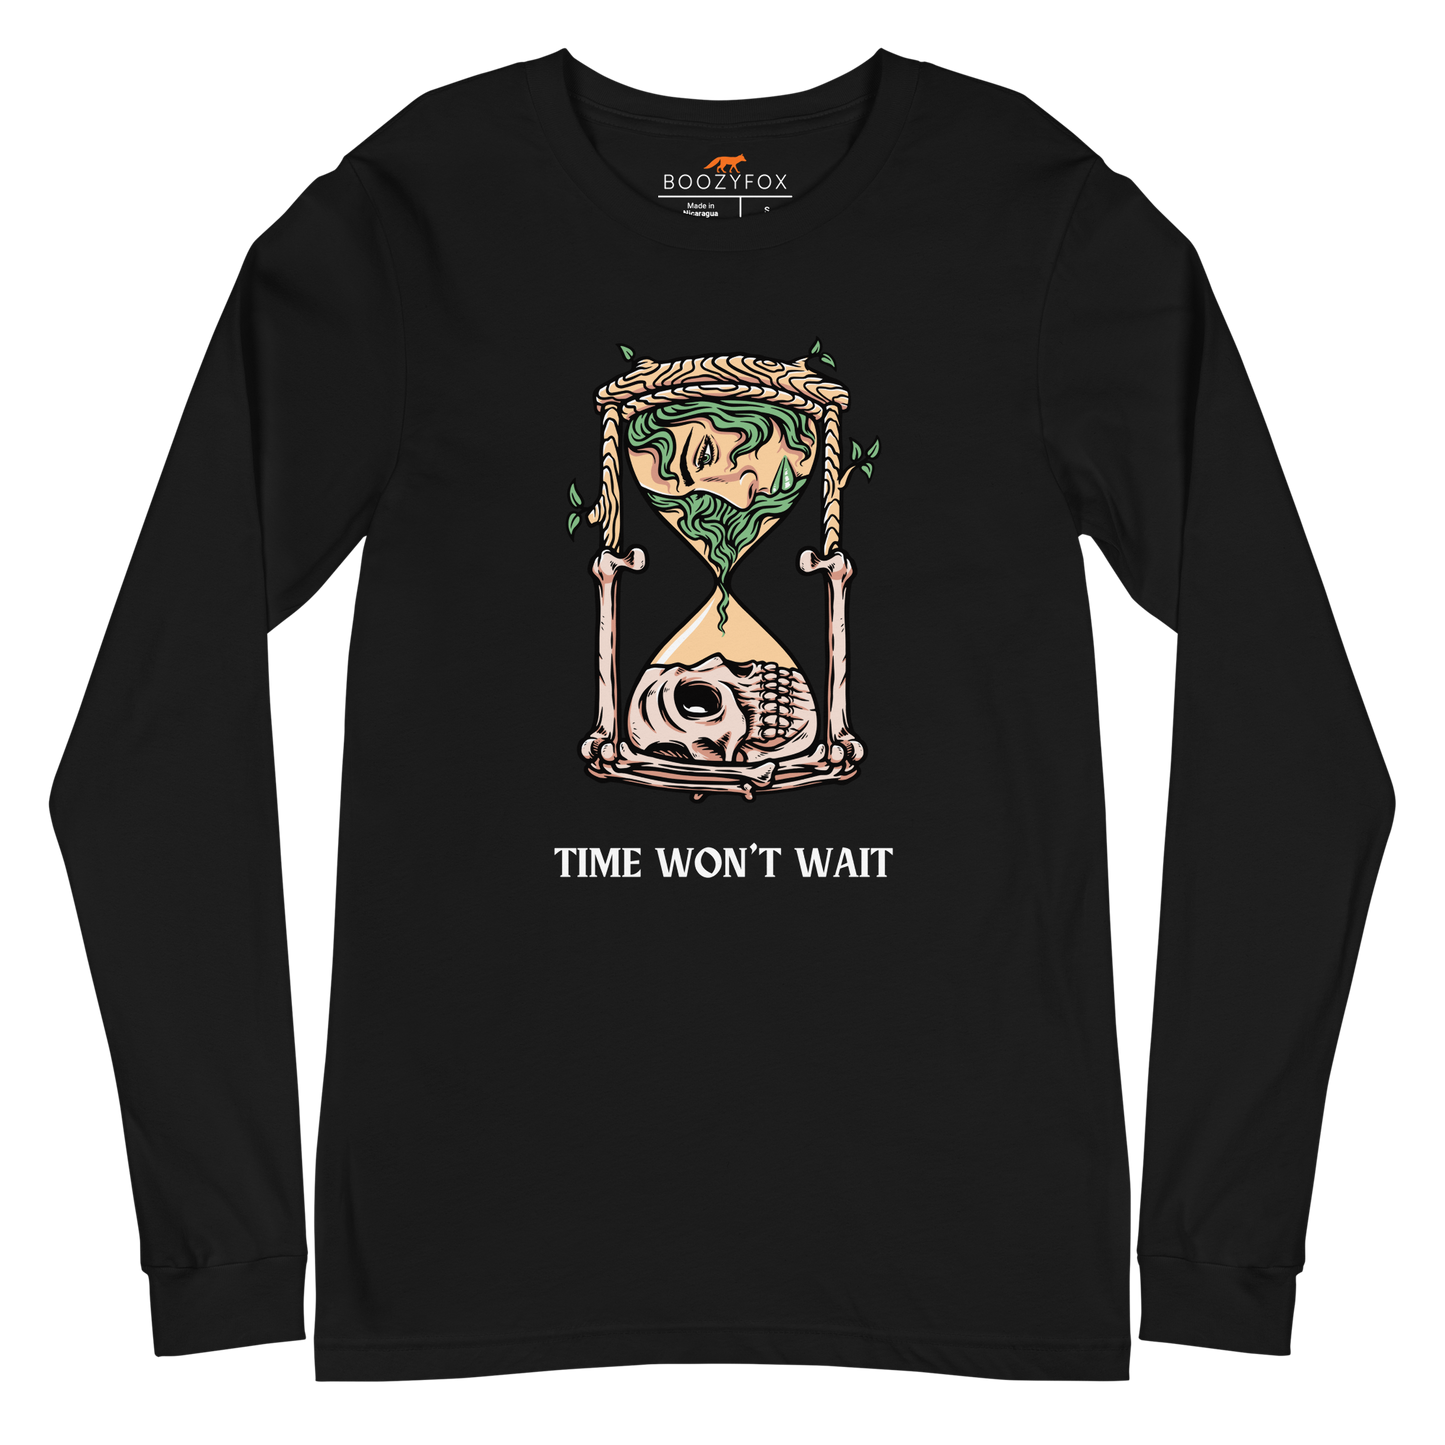 Black Hourglass Long Sleeve Tee featuring a captivating Time Won't Wait graphic on the chest - Cool Hourglass Long Sleeve Graphic Tees - Boozy Fox